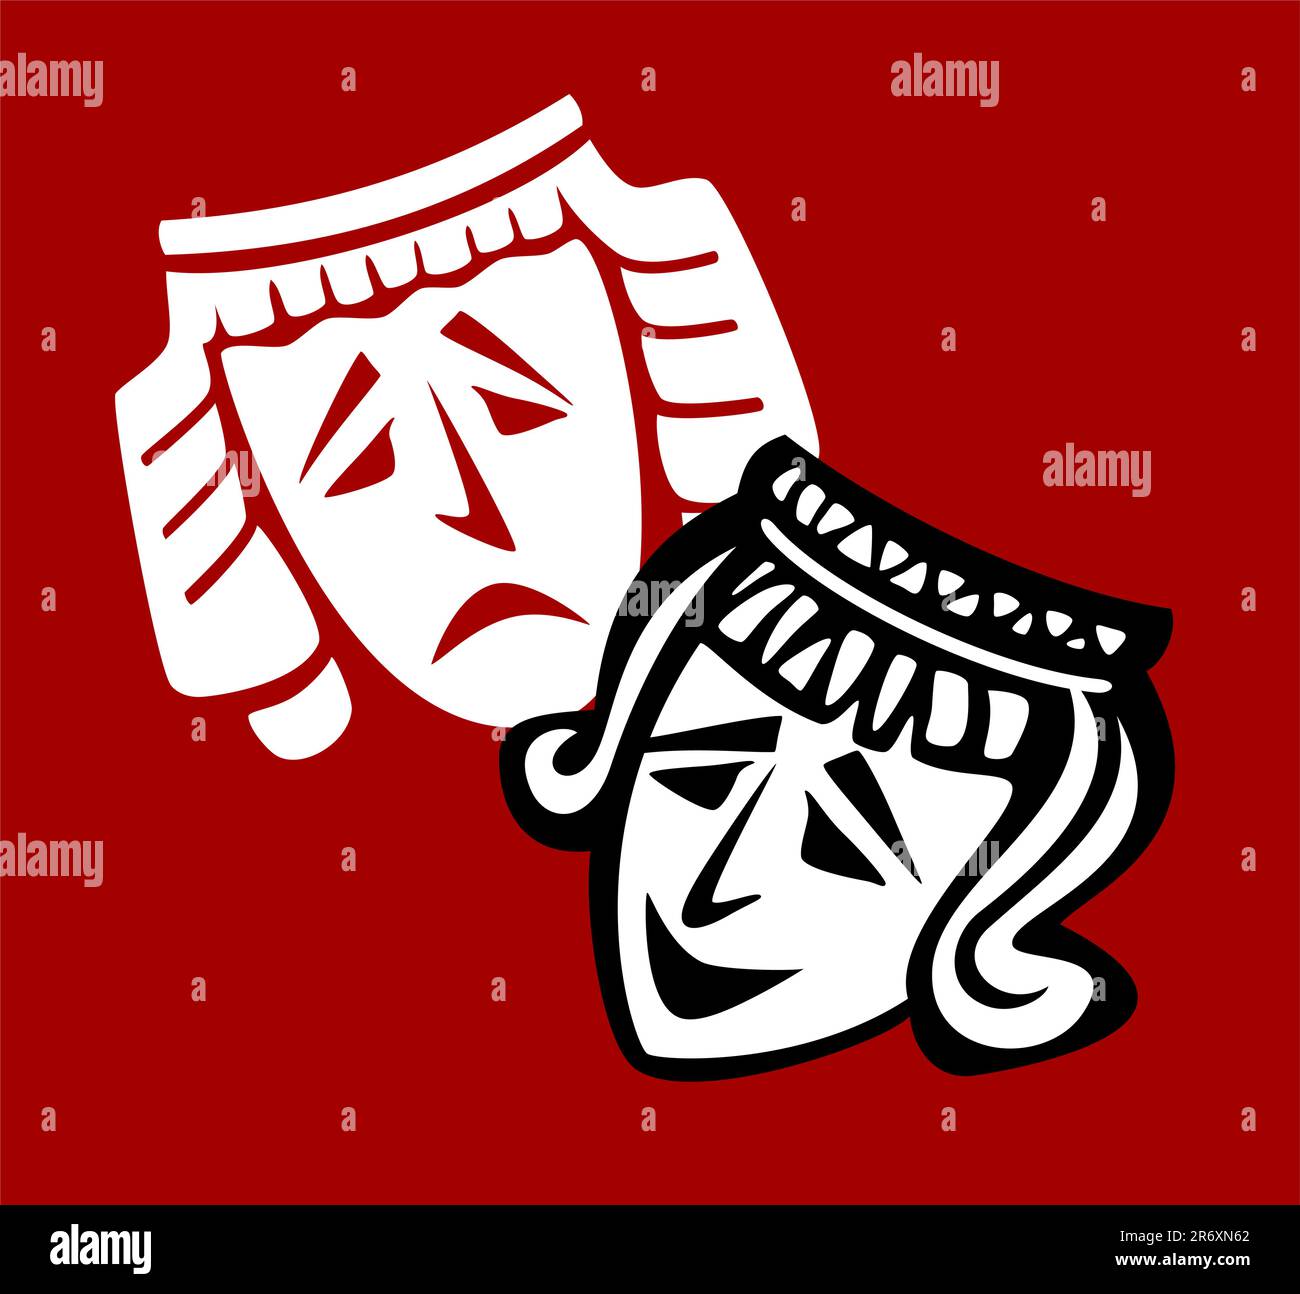 Theater mask on red background, vector illustration Stock Vector